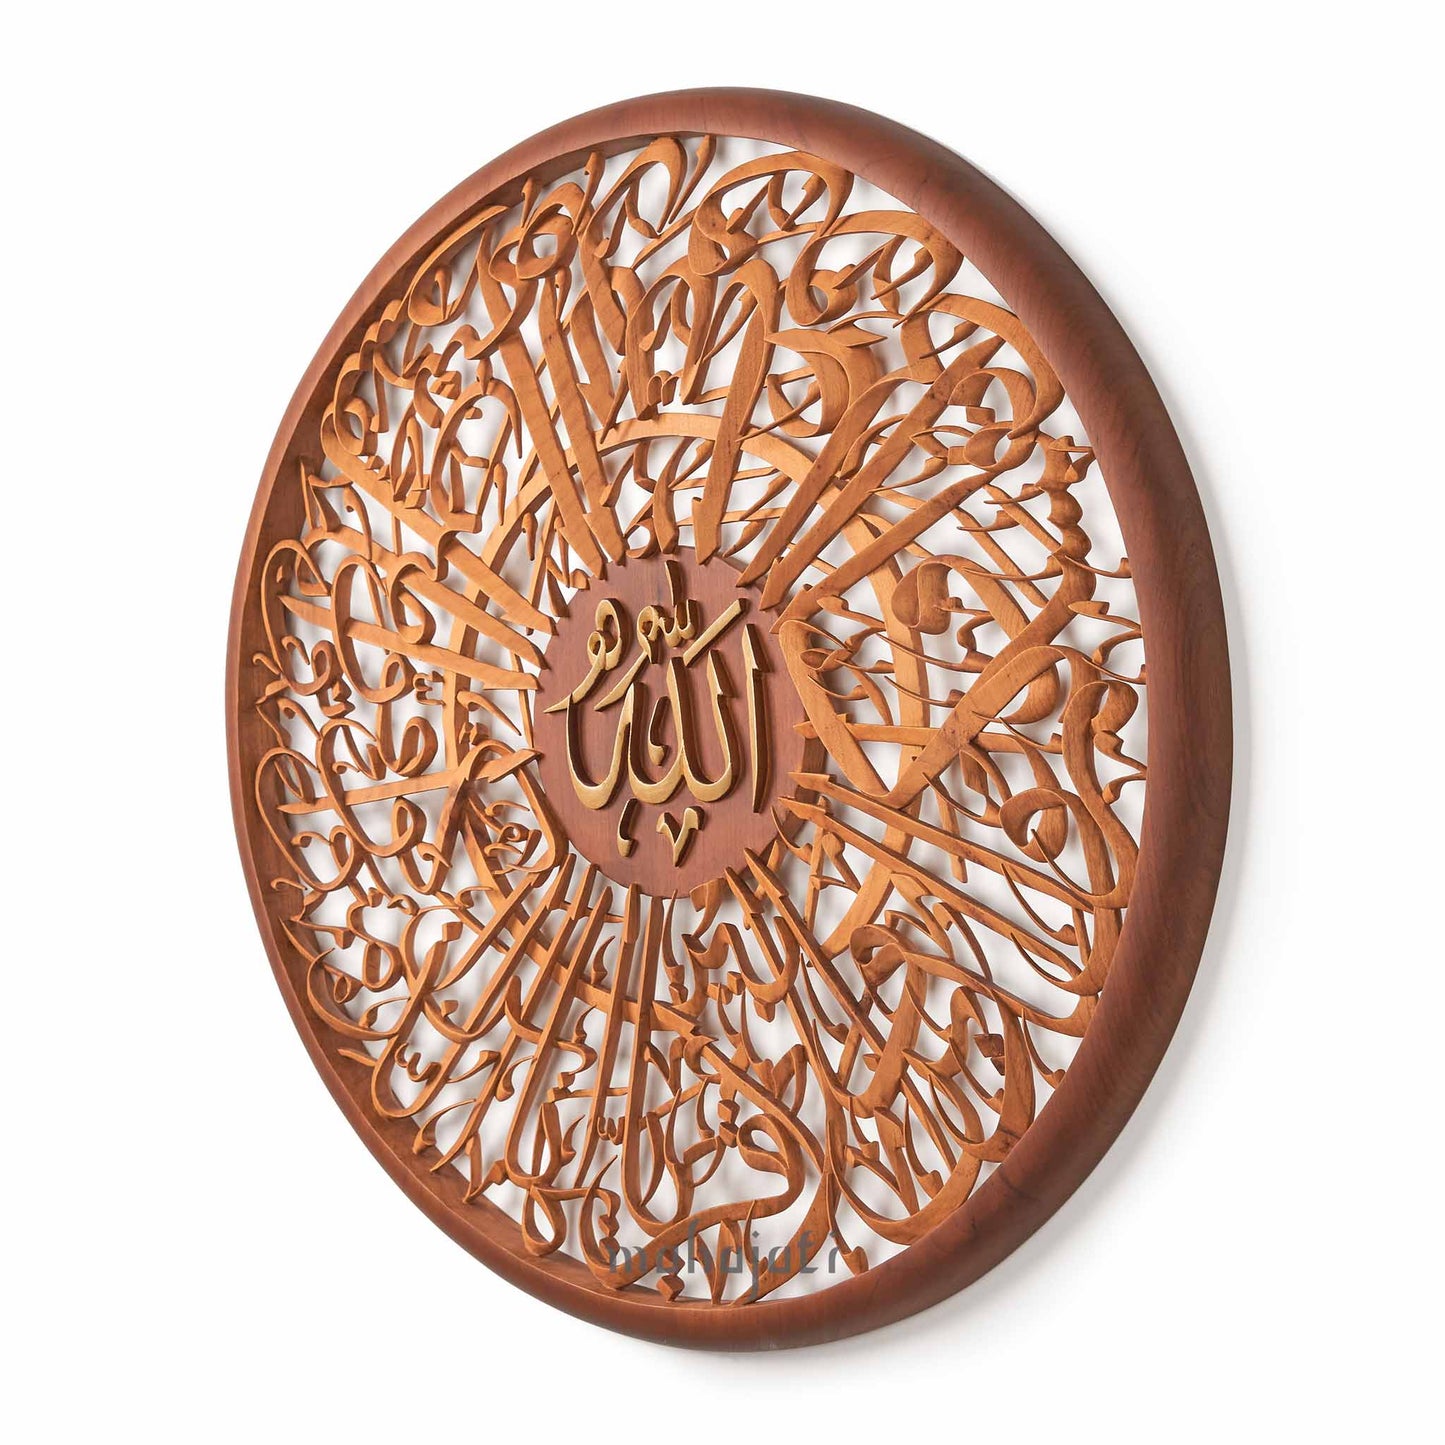 An-Nisa / Allah SWT Arabic Calligraphy Wood Carving Wall Decor